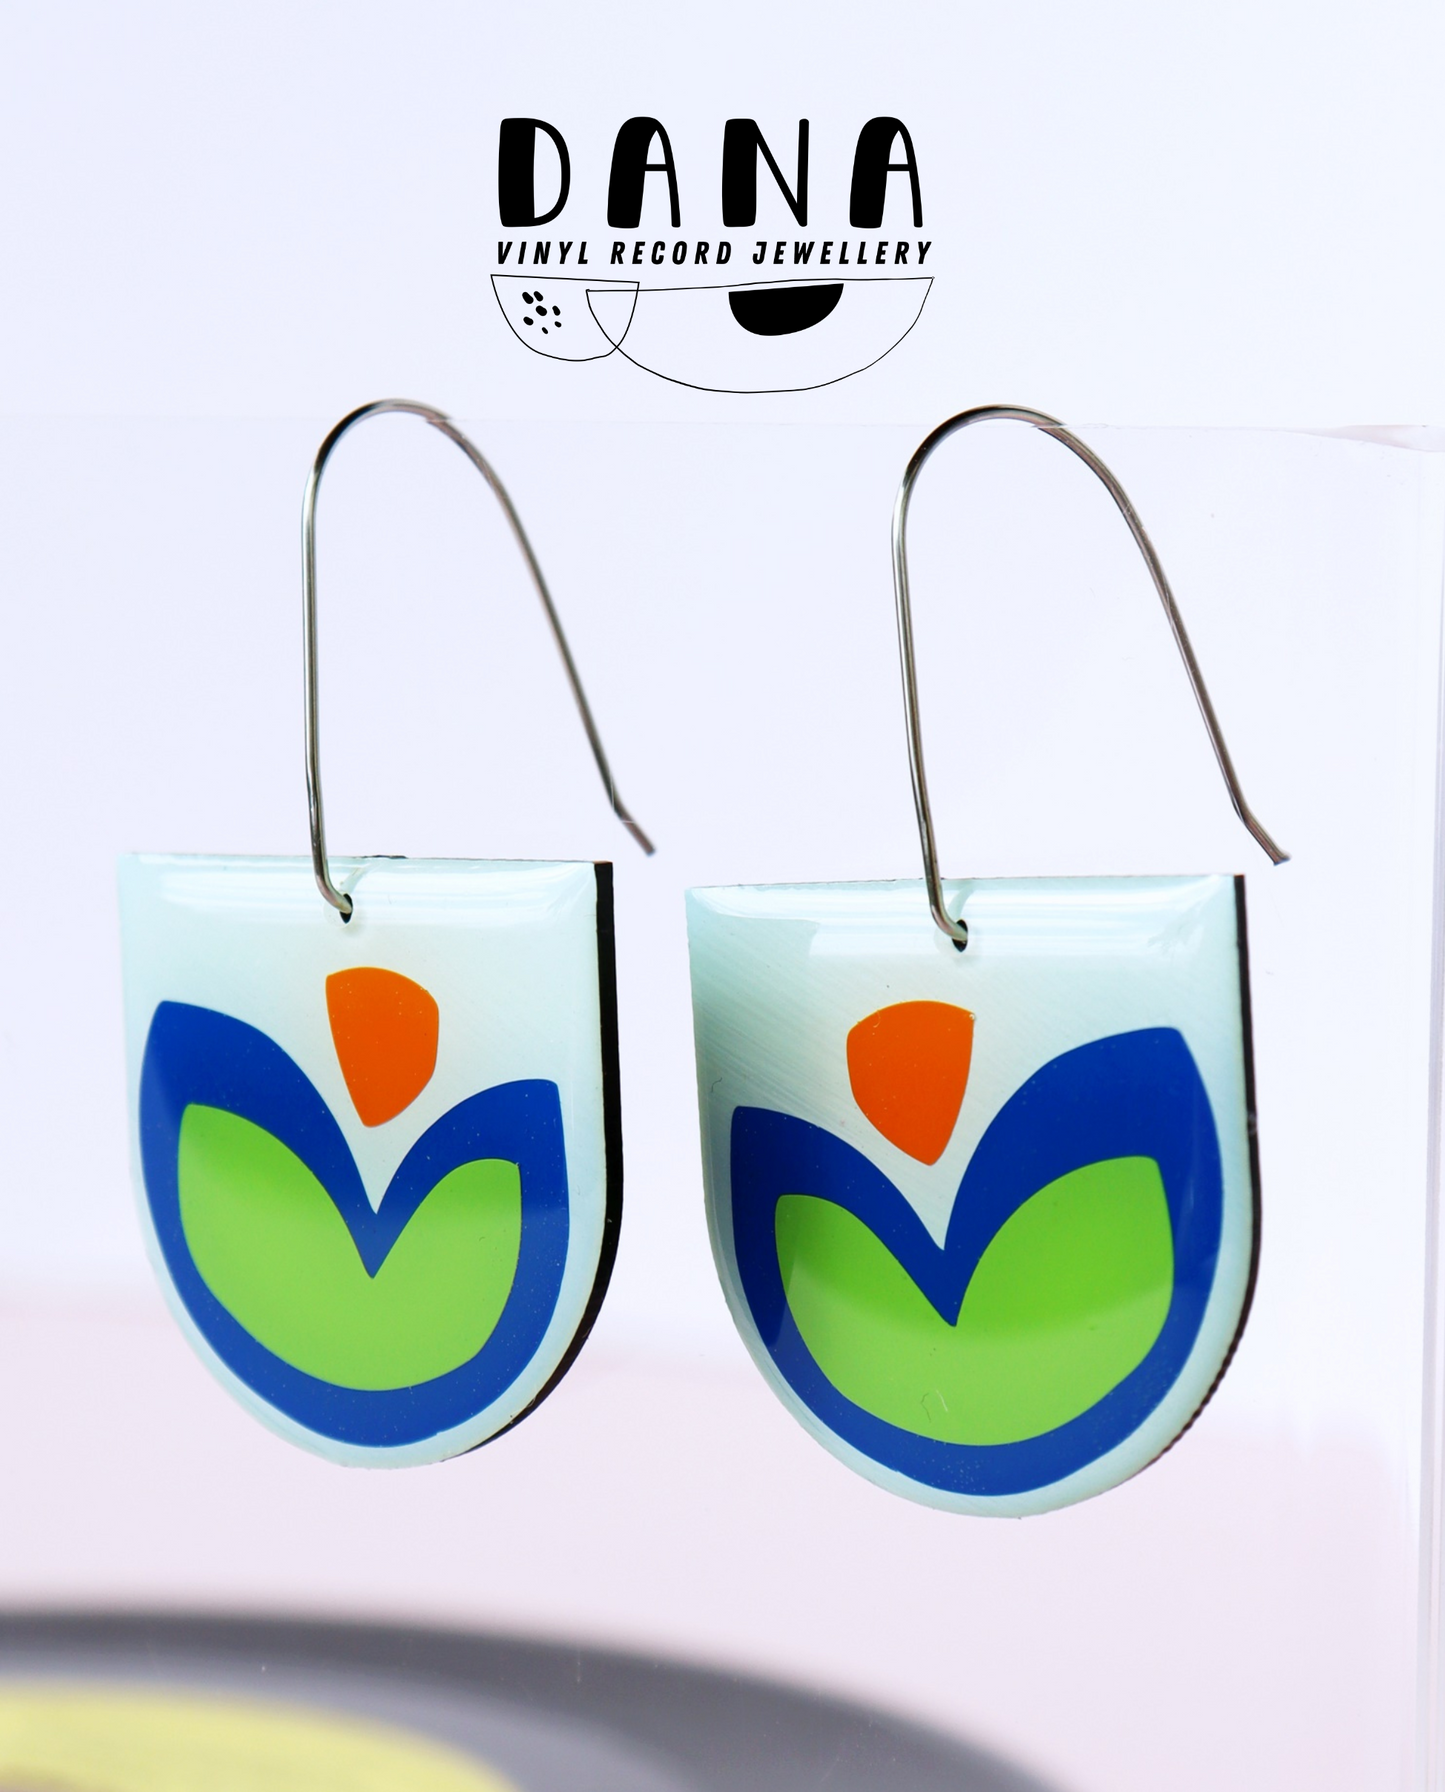 FLOR in blue, vibrant green and orange / upcycled vinyl record earrings